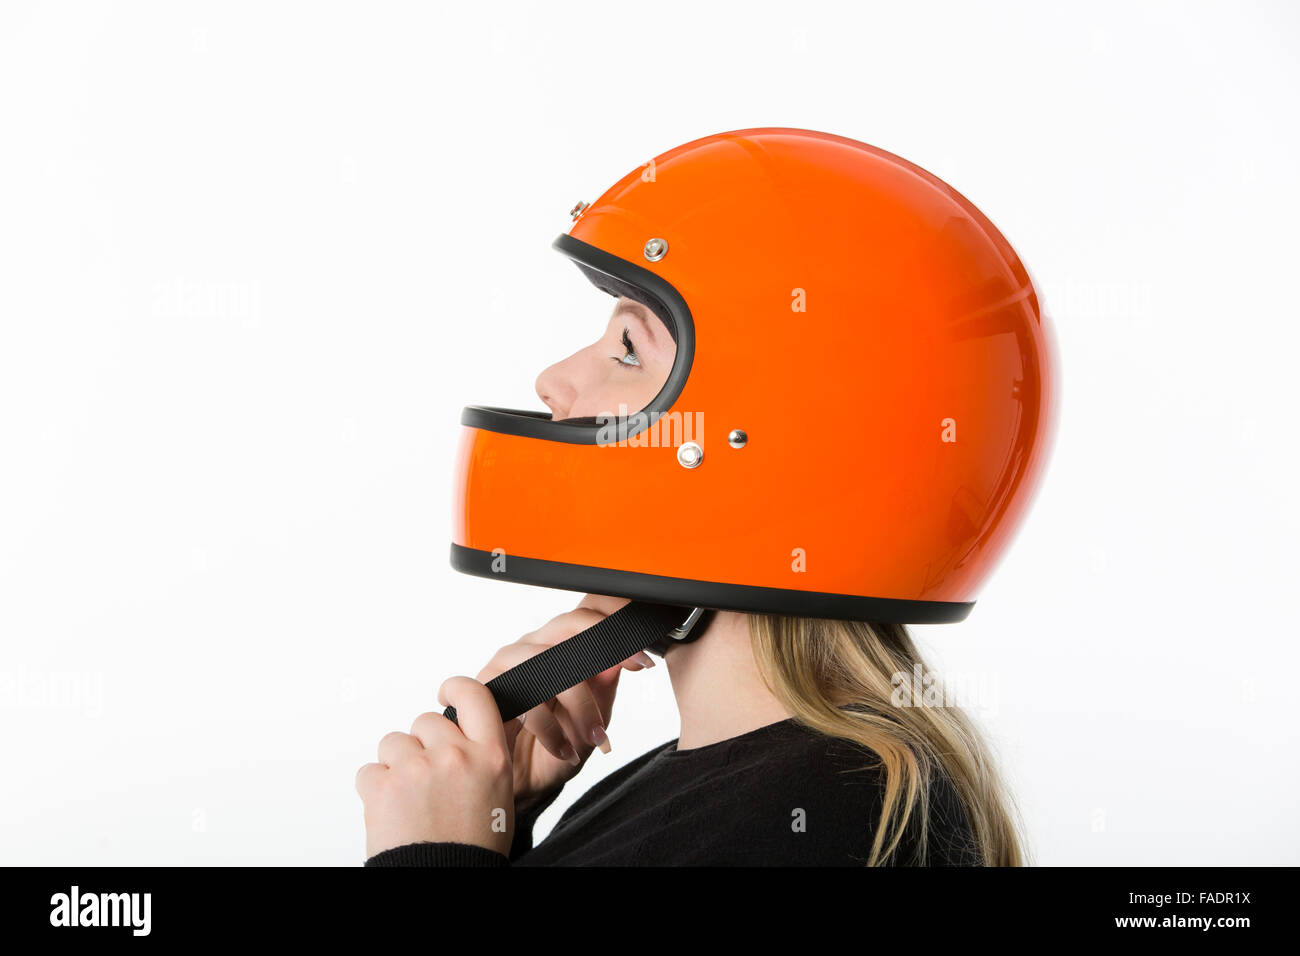 Cute girl with blond hair with orange motorcycle helmet. Studio shot on white background. Stock Photo